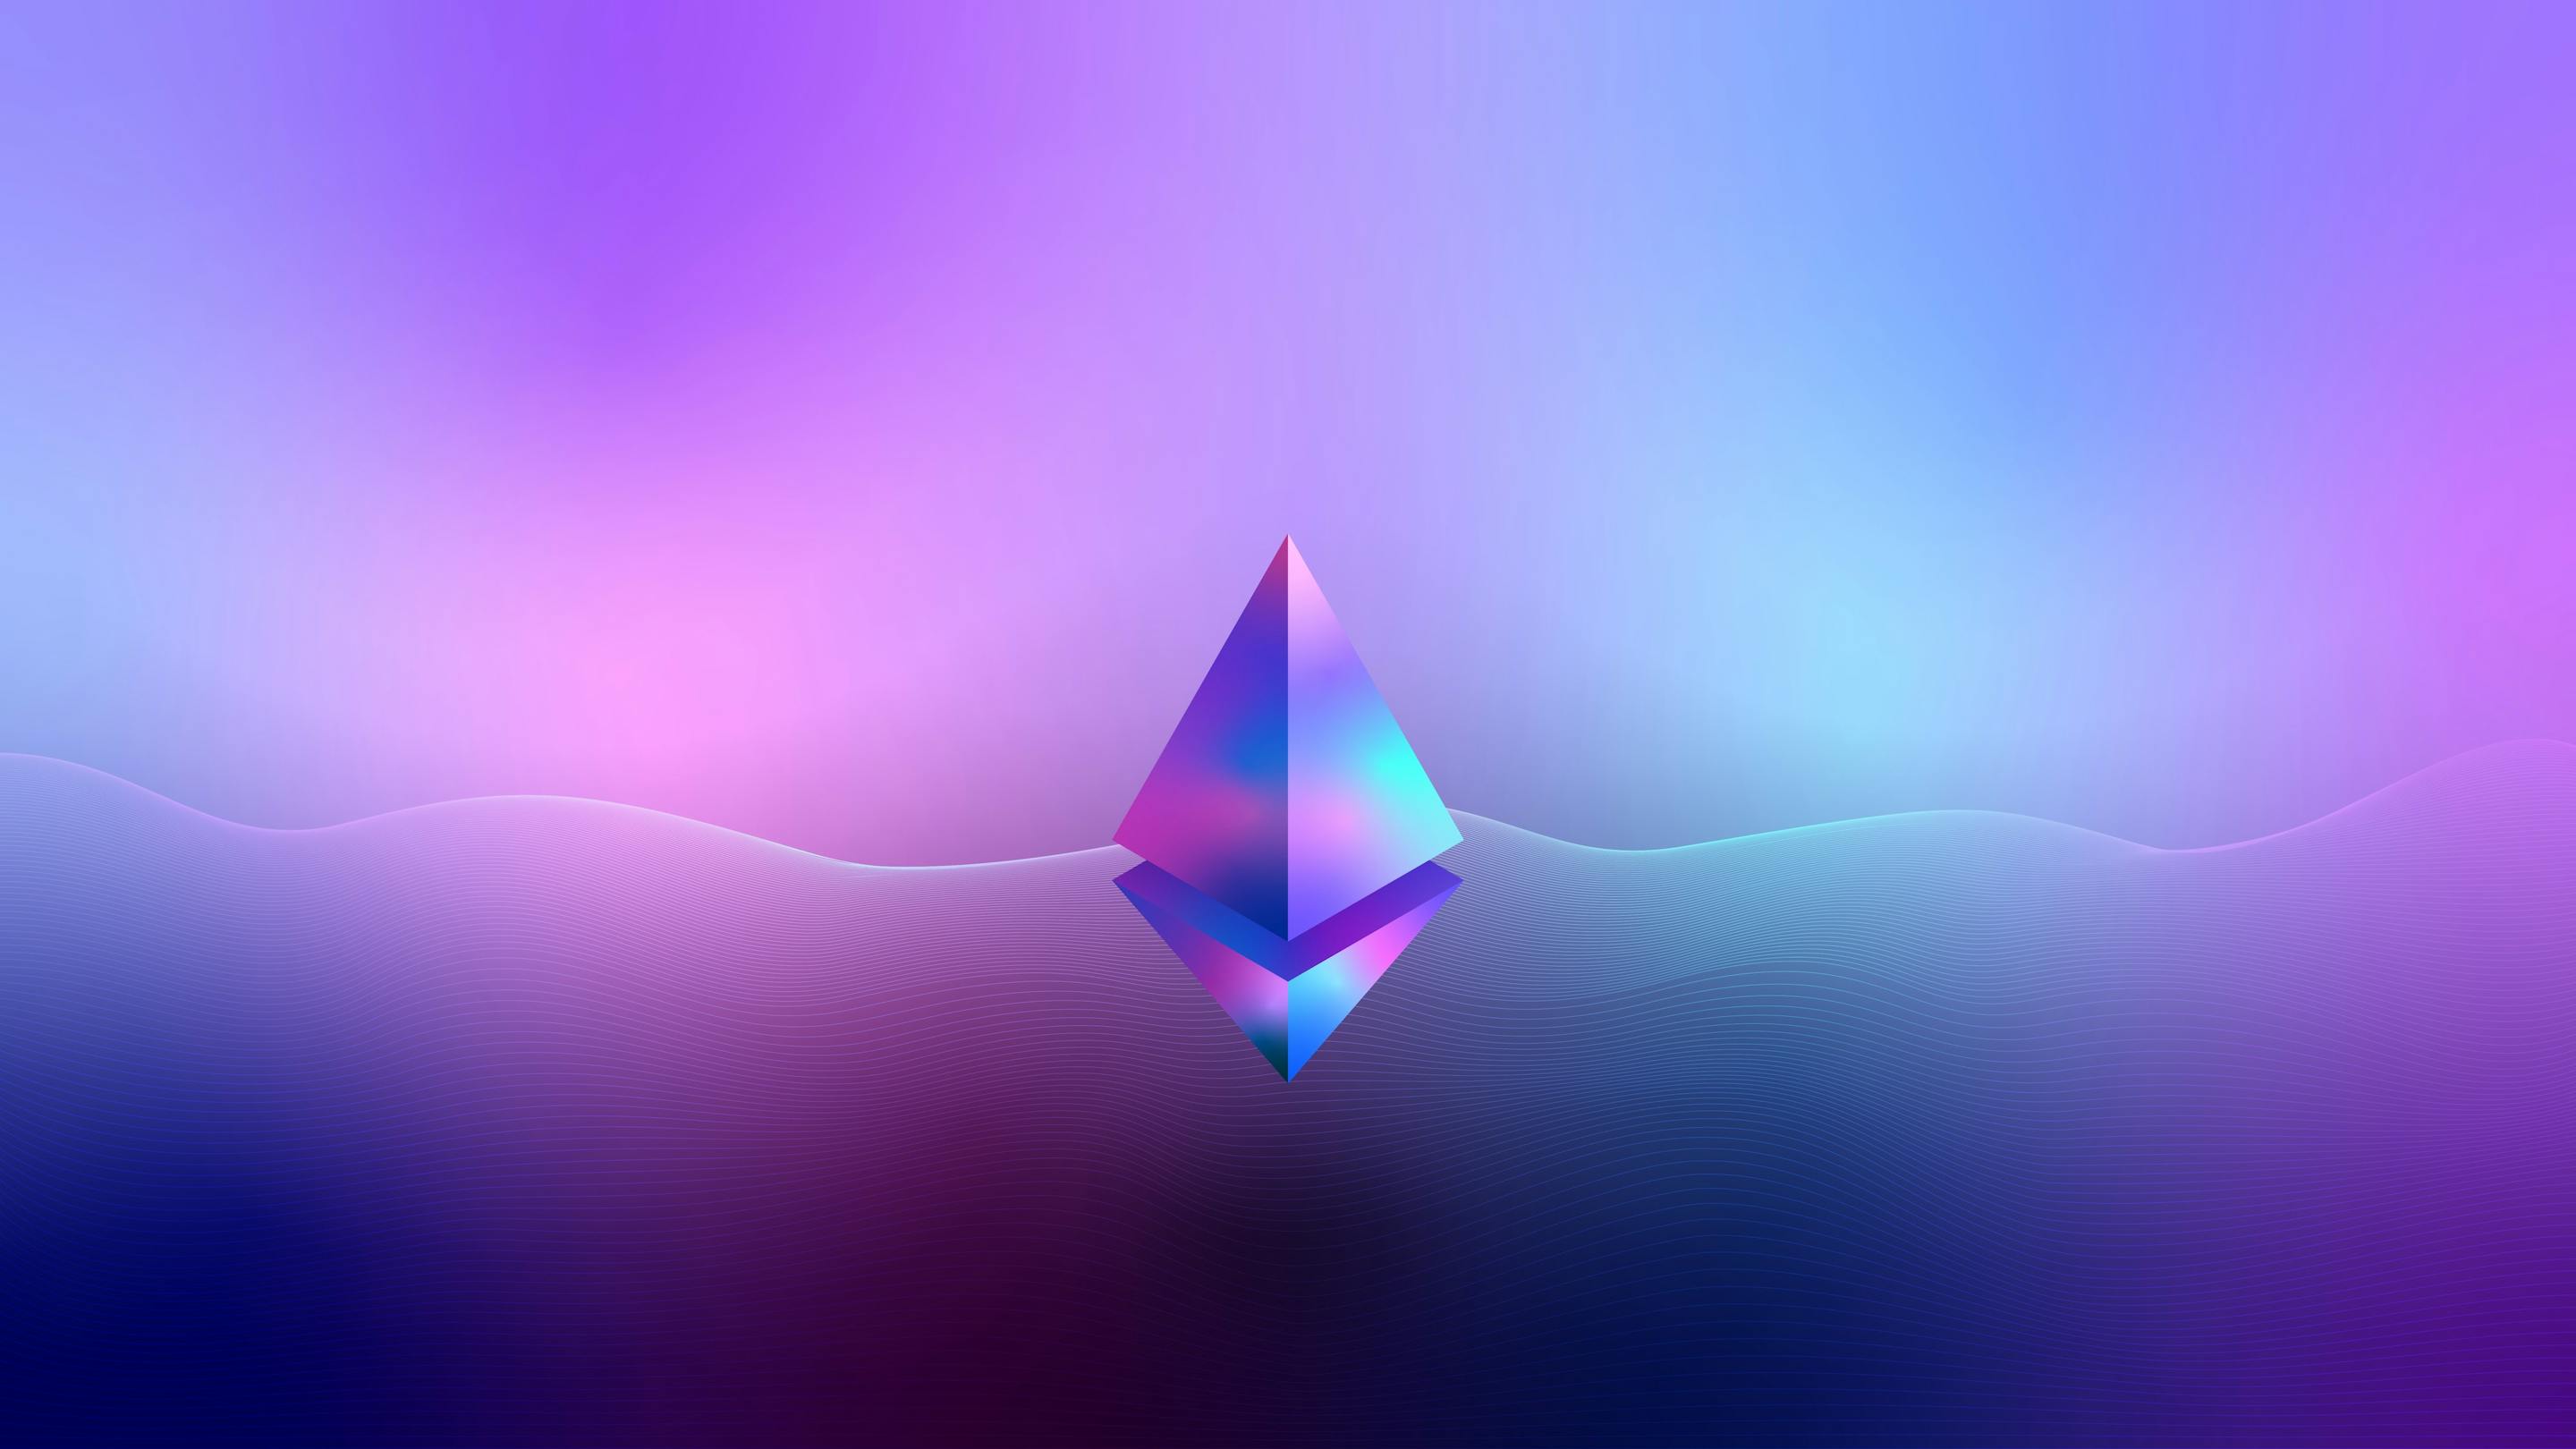 Ethereum: The Foundation of the Decentralized Web